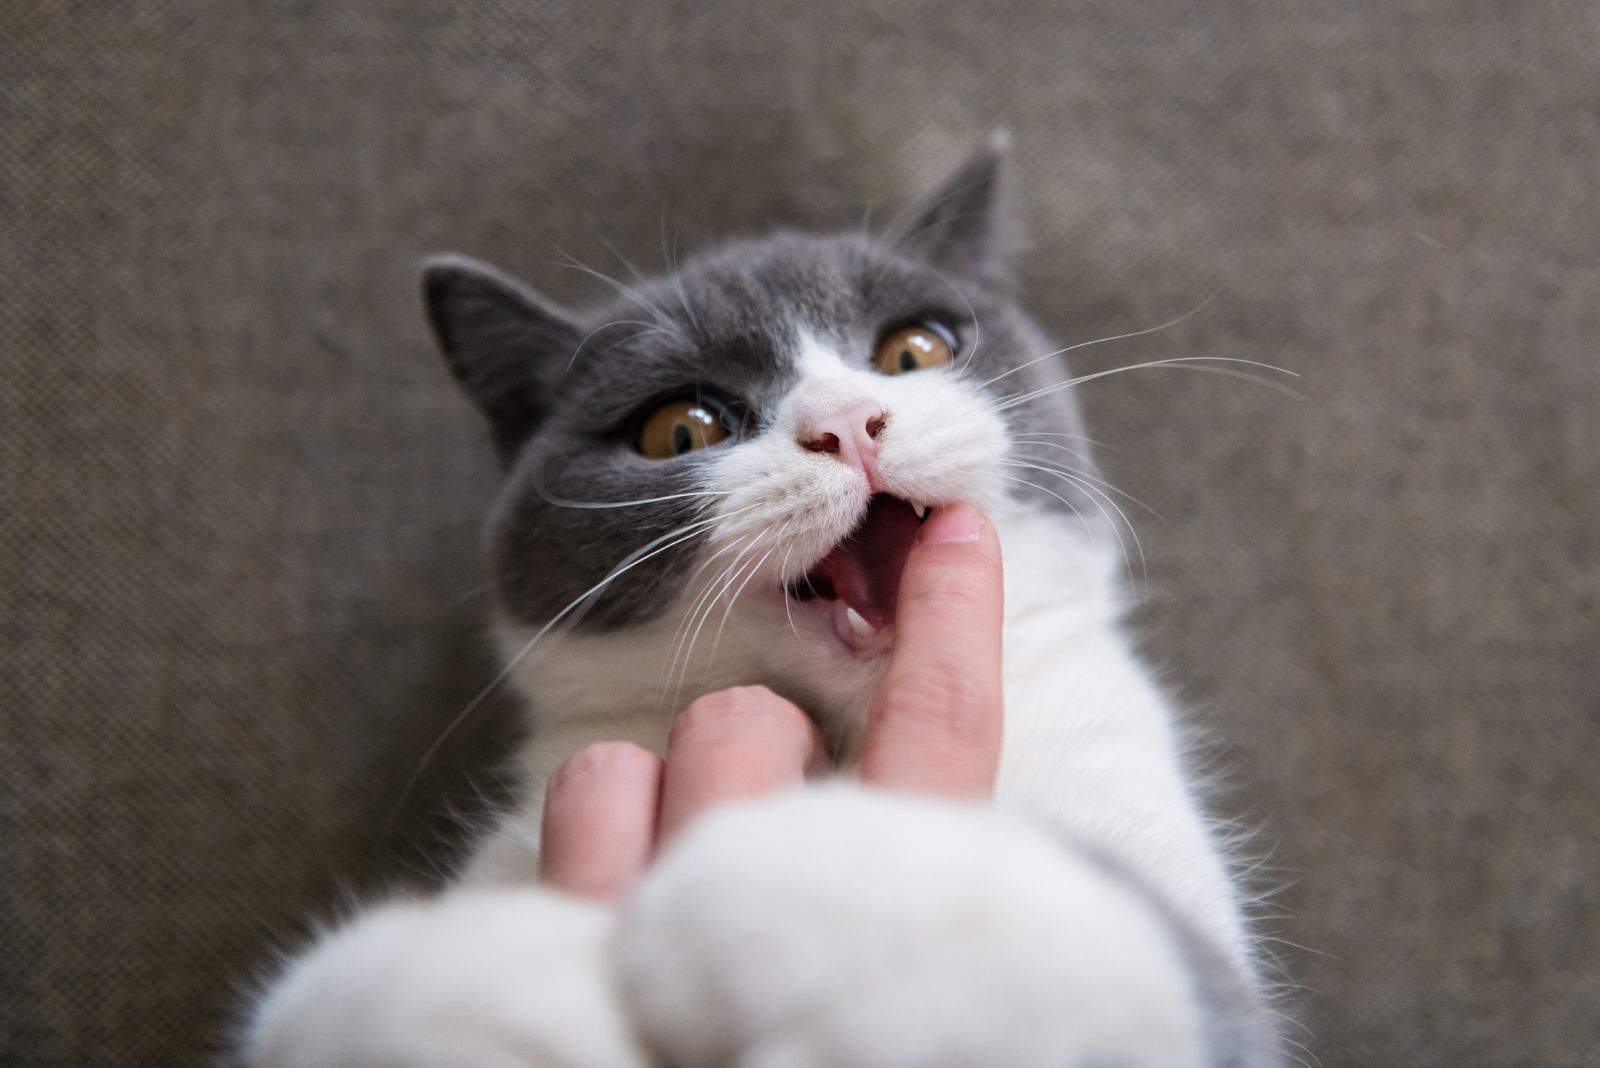 cat bitting owners finger